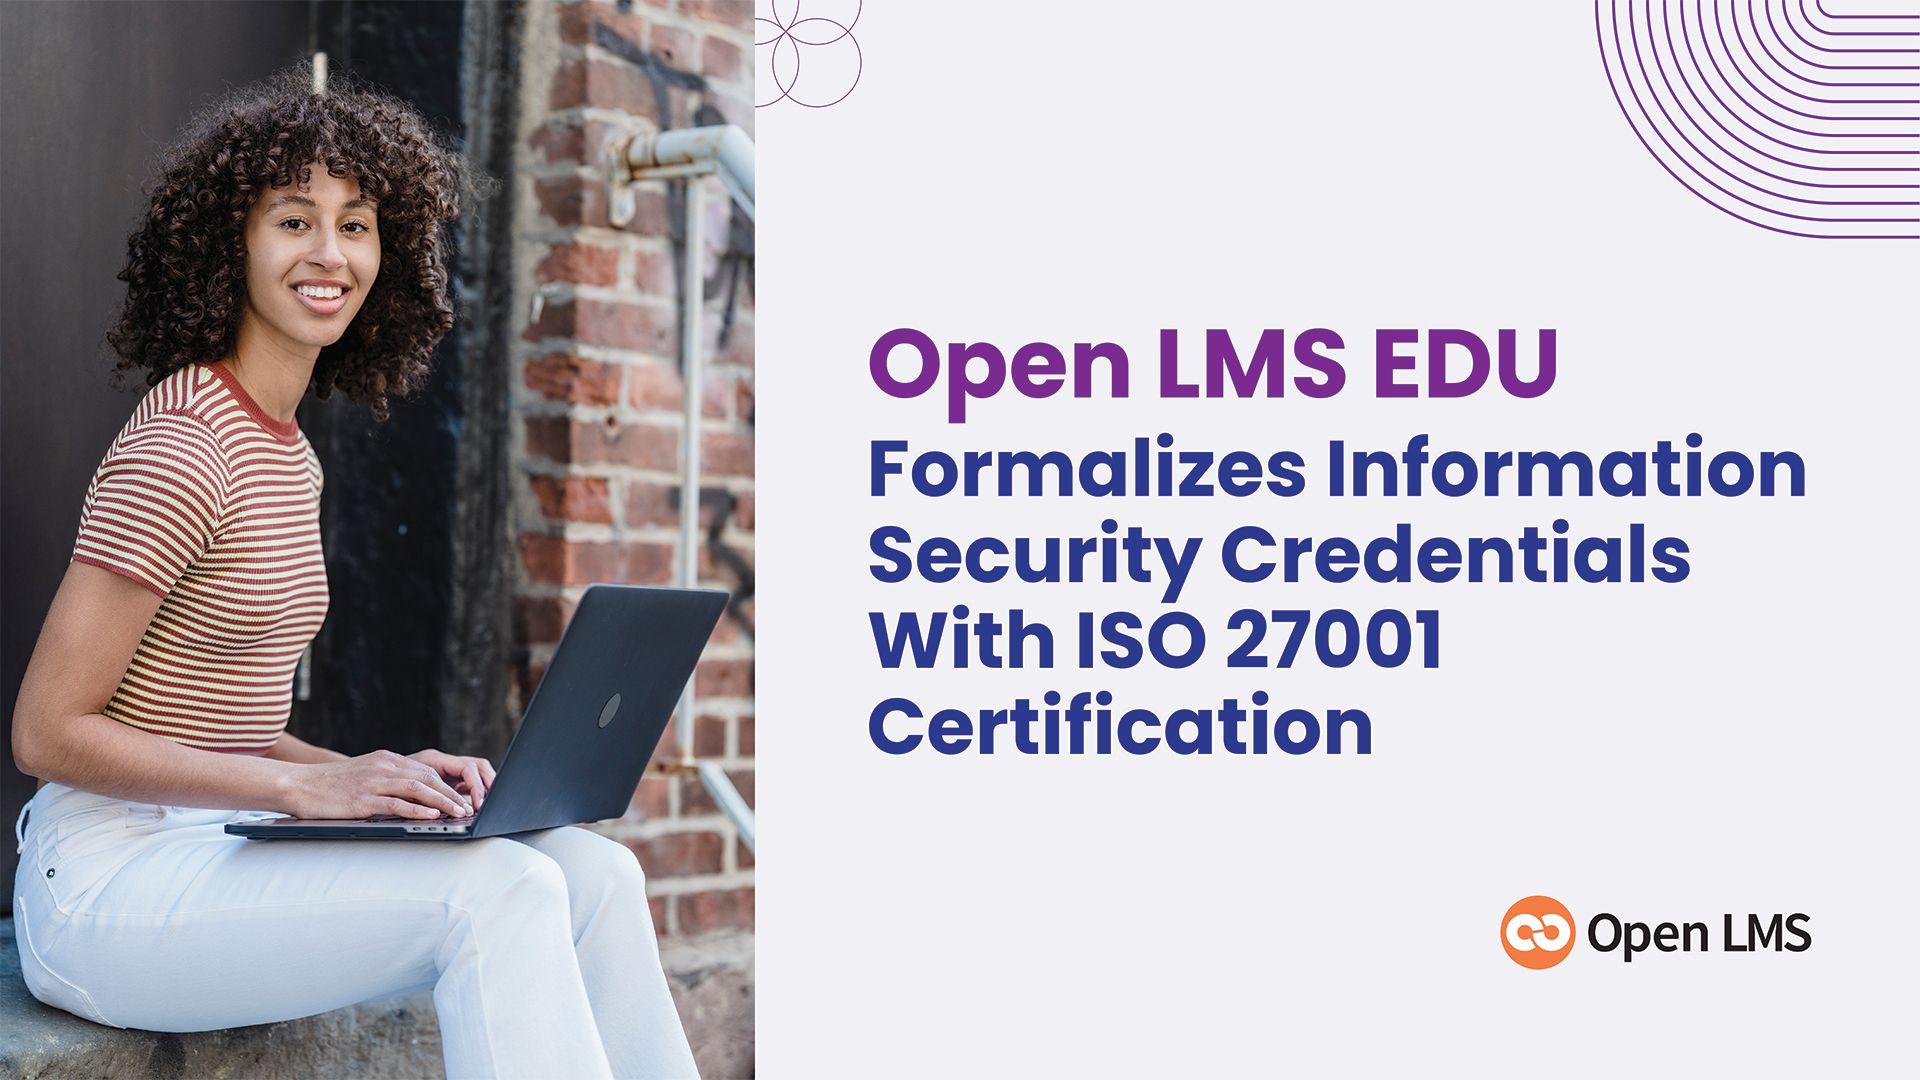 Open LMS EDU Formalizes Information Security Credentials With ISO 27001 Certification